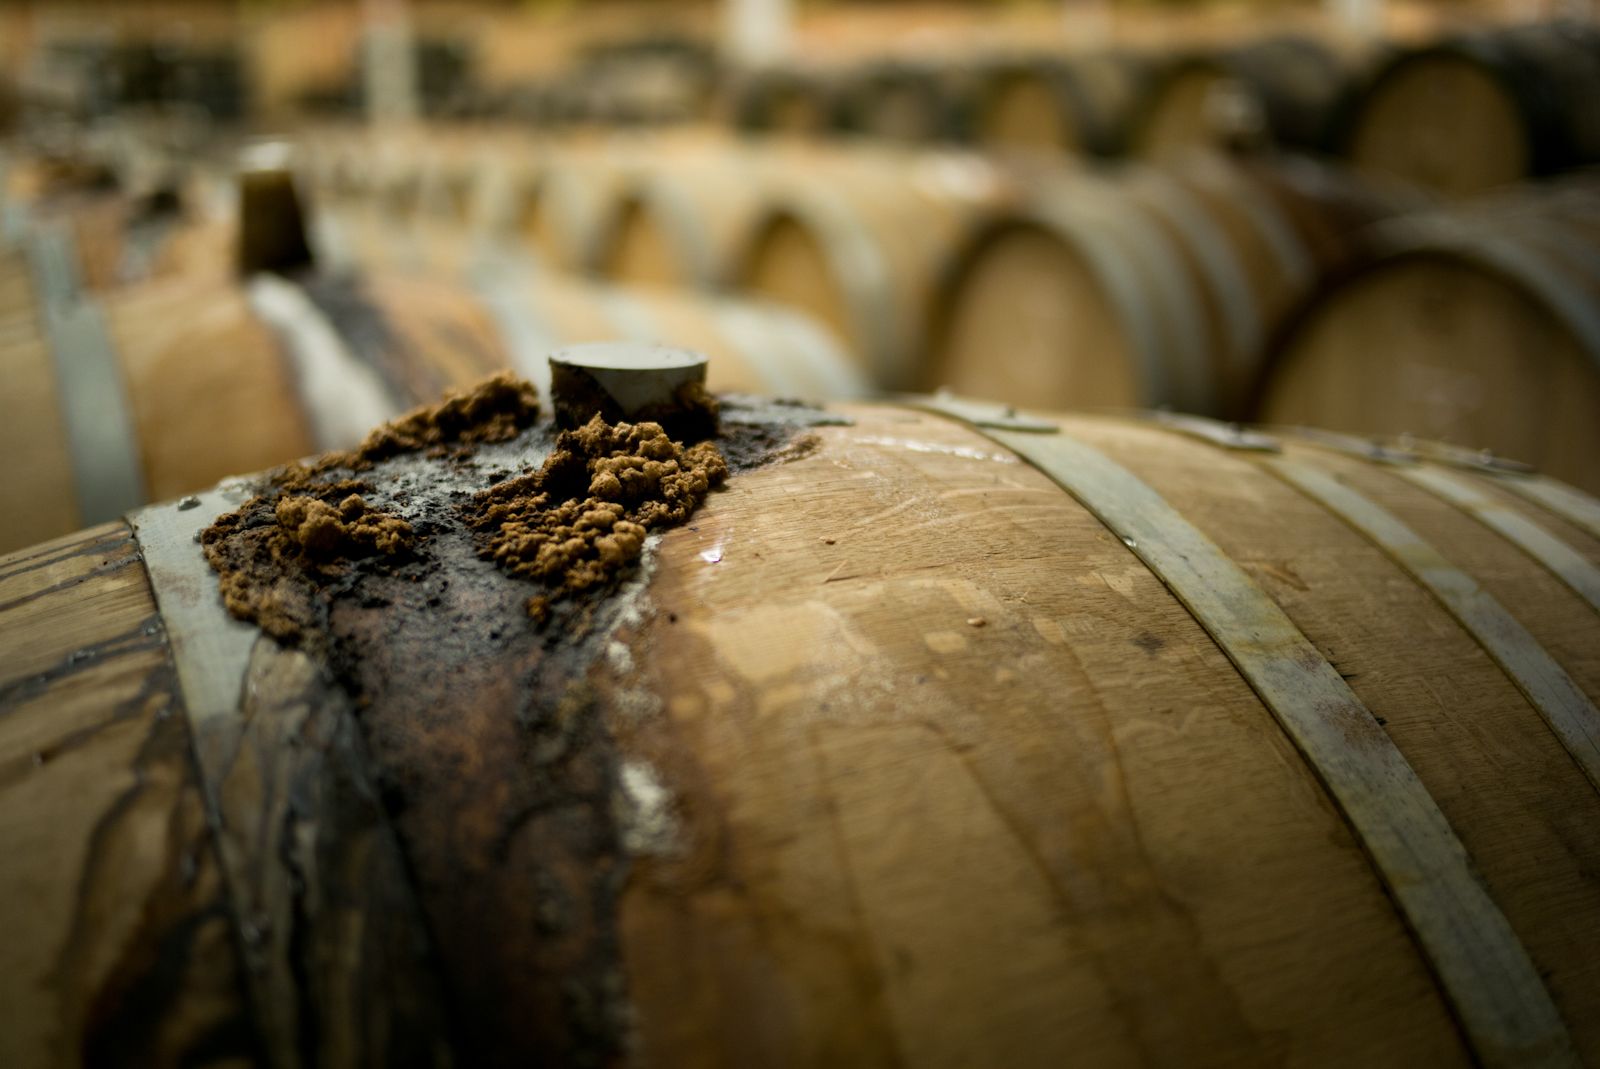 A wooden barrel after the first spontaneous fermentation, closed off from the open air.